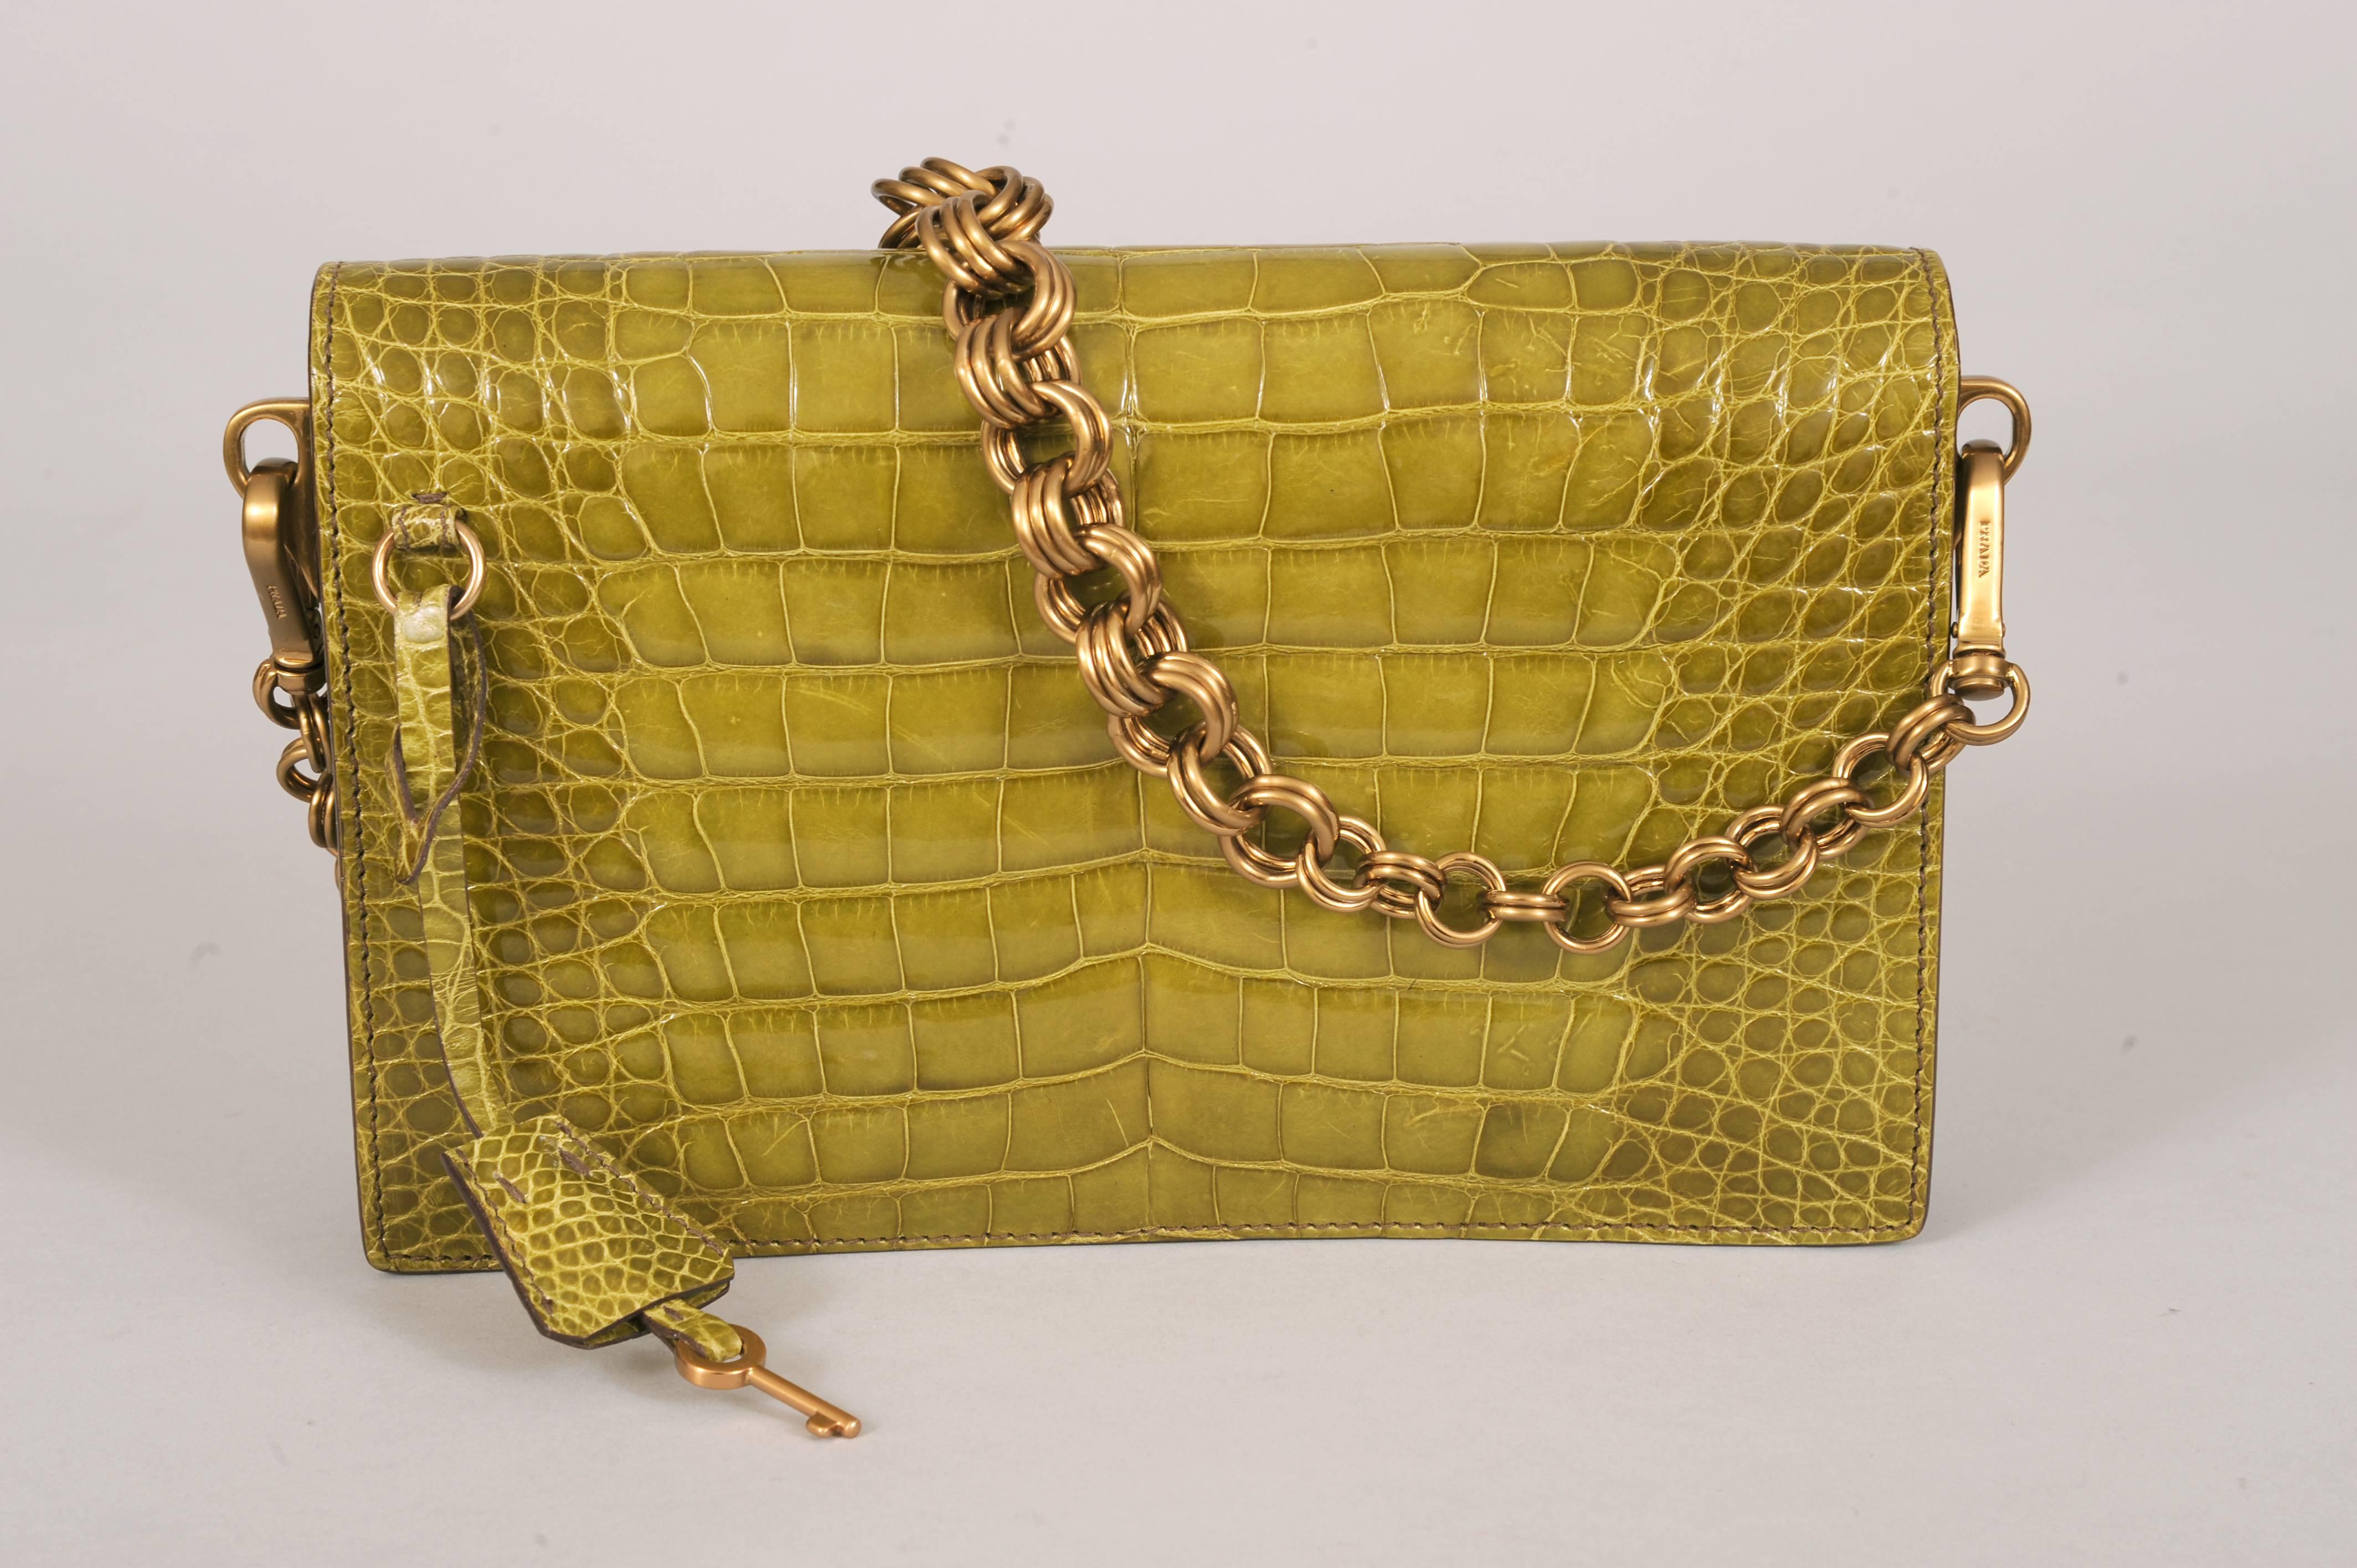 What an unusual color for an alligator bag! This rich olive green gator bag is so stylish. You can carry it by the chain strap or remove the chain and carry it as a clutch. The bag has a gold toned closure with a lock and key in a matching clochette